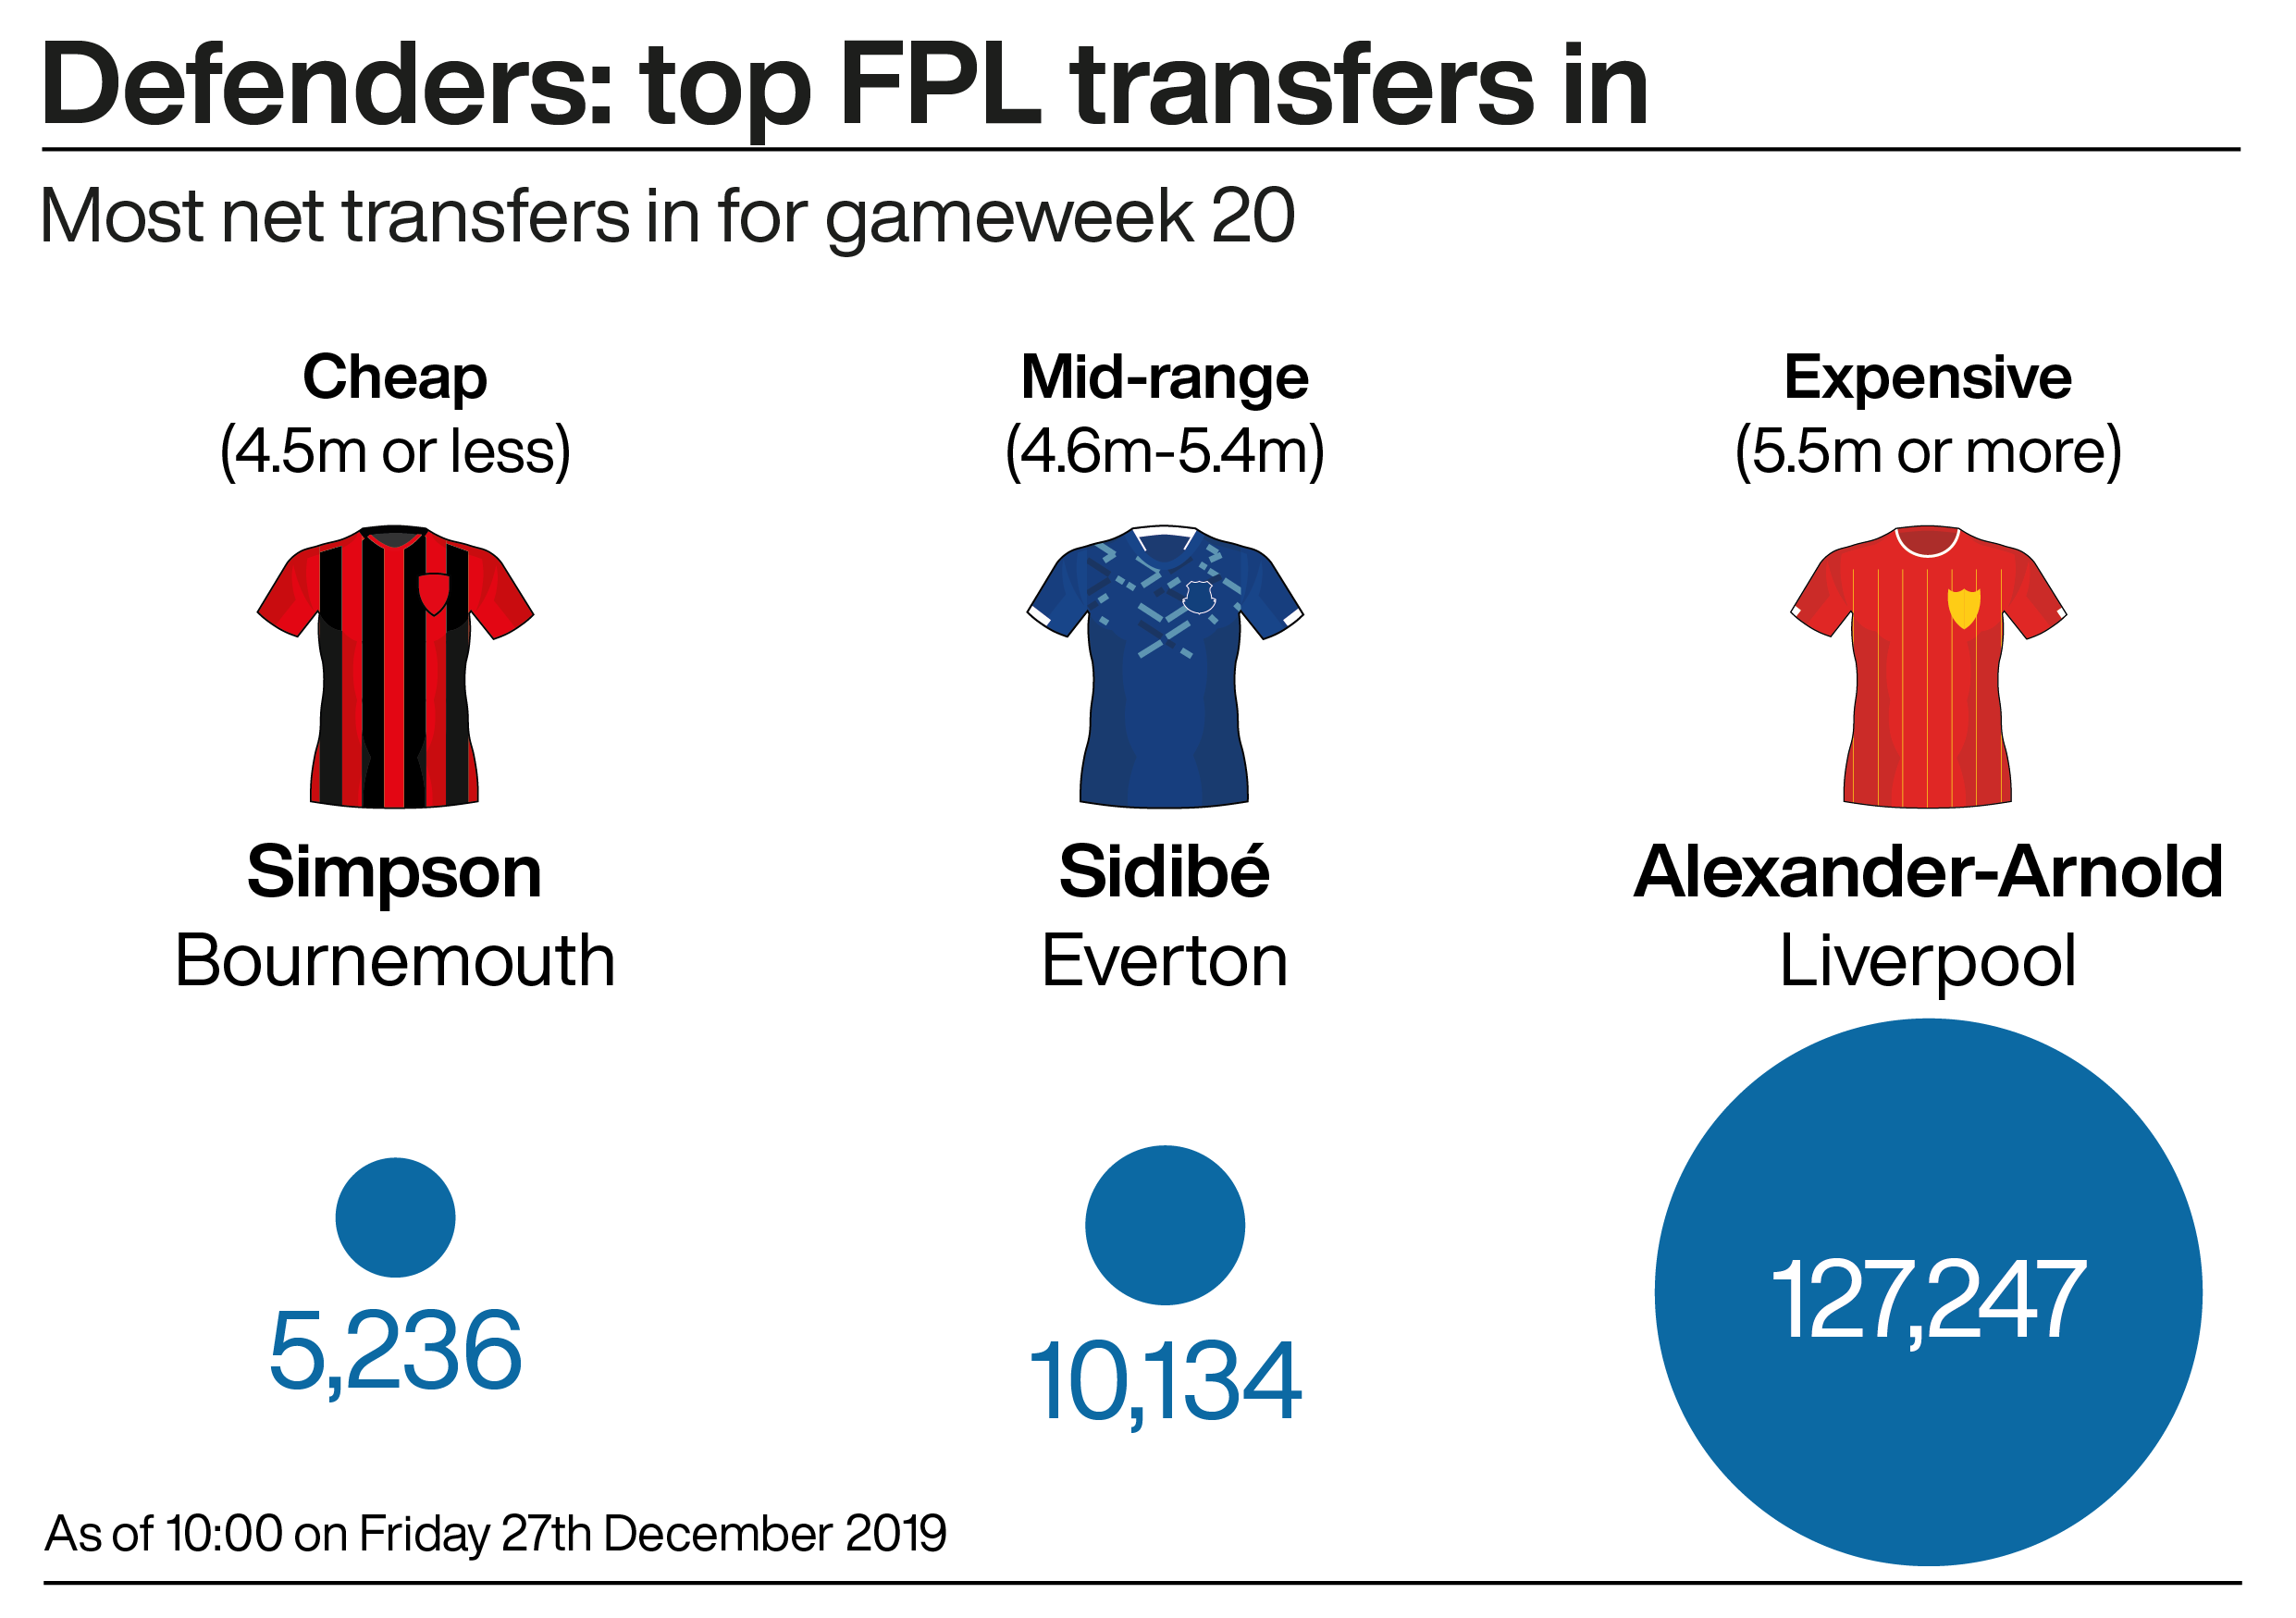 A graphic showing the most transferred in (net transfers) defenders in the Fantasy Premier League this week